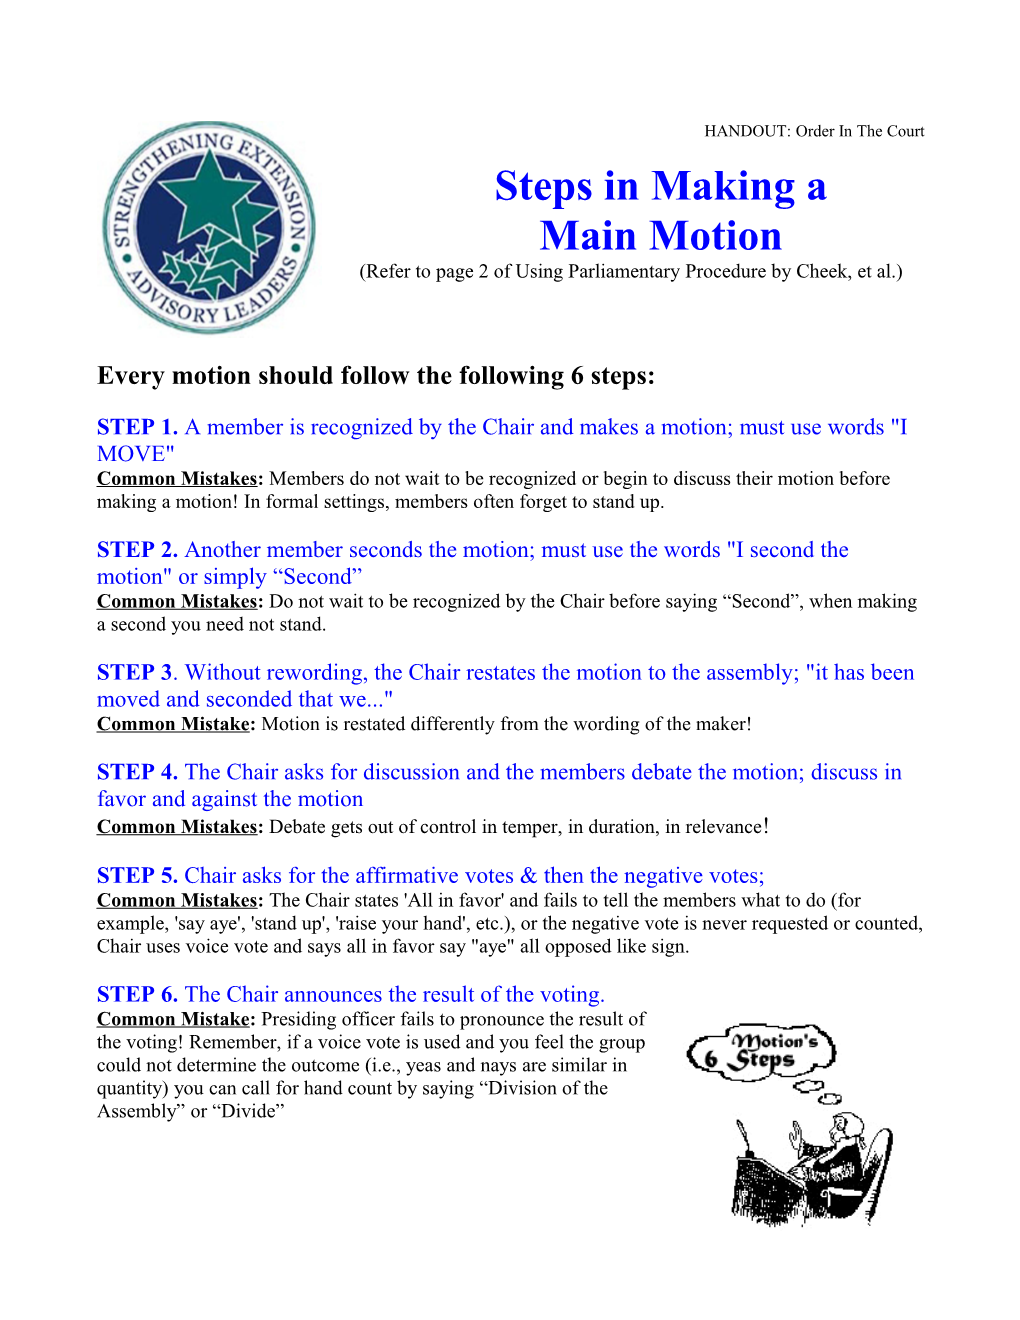 Steps in Making a Main Motion